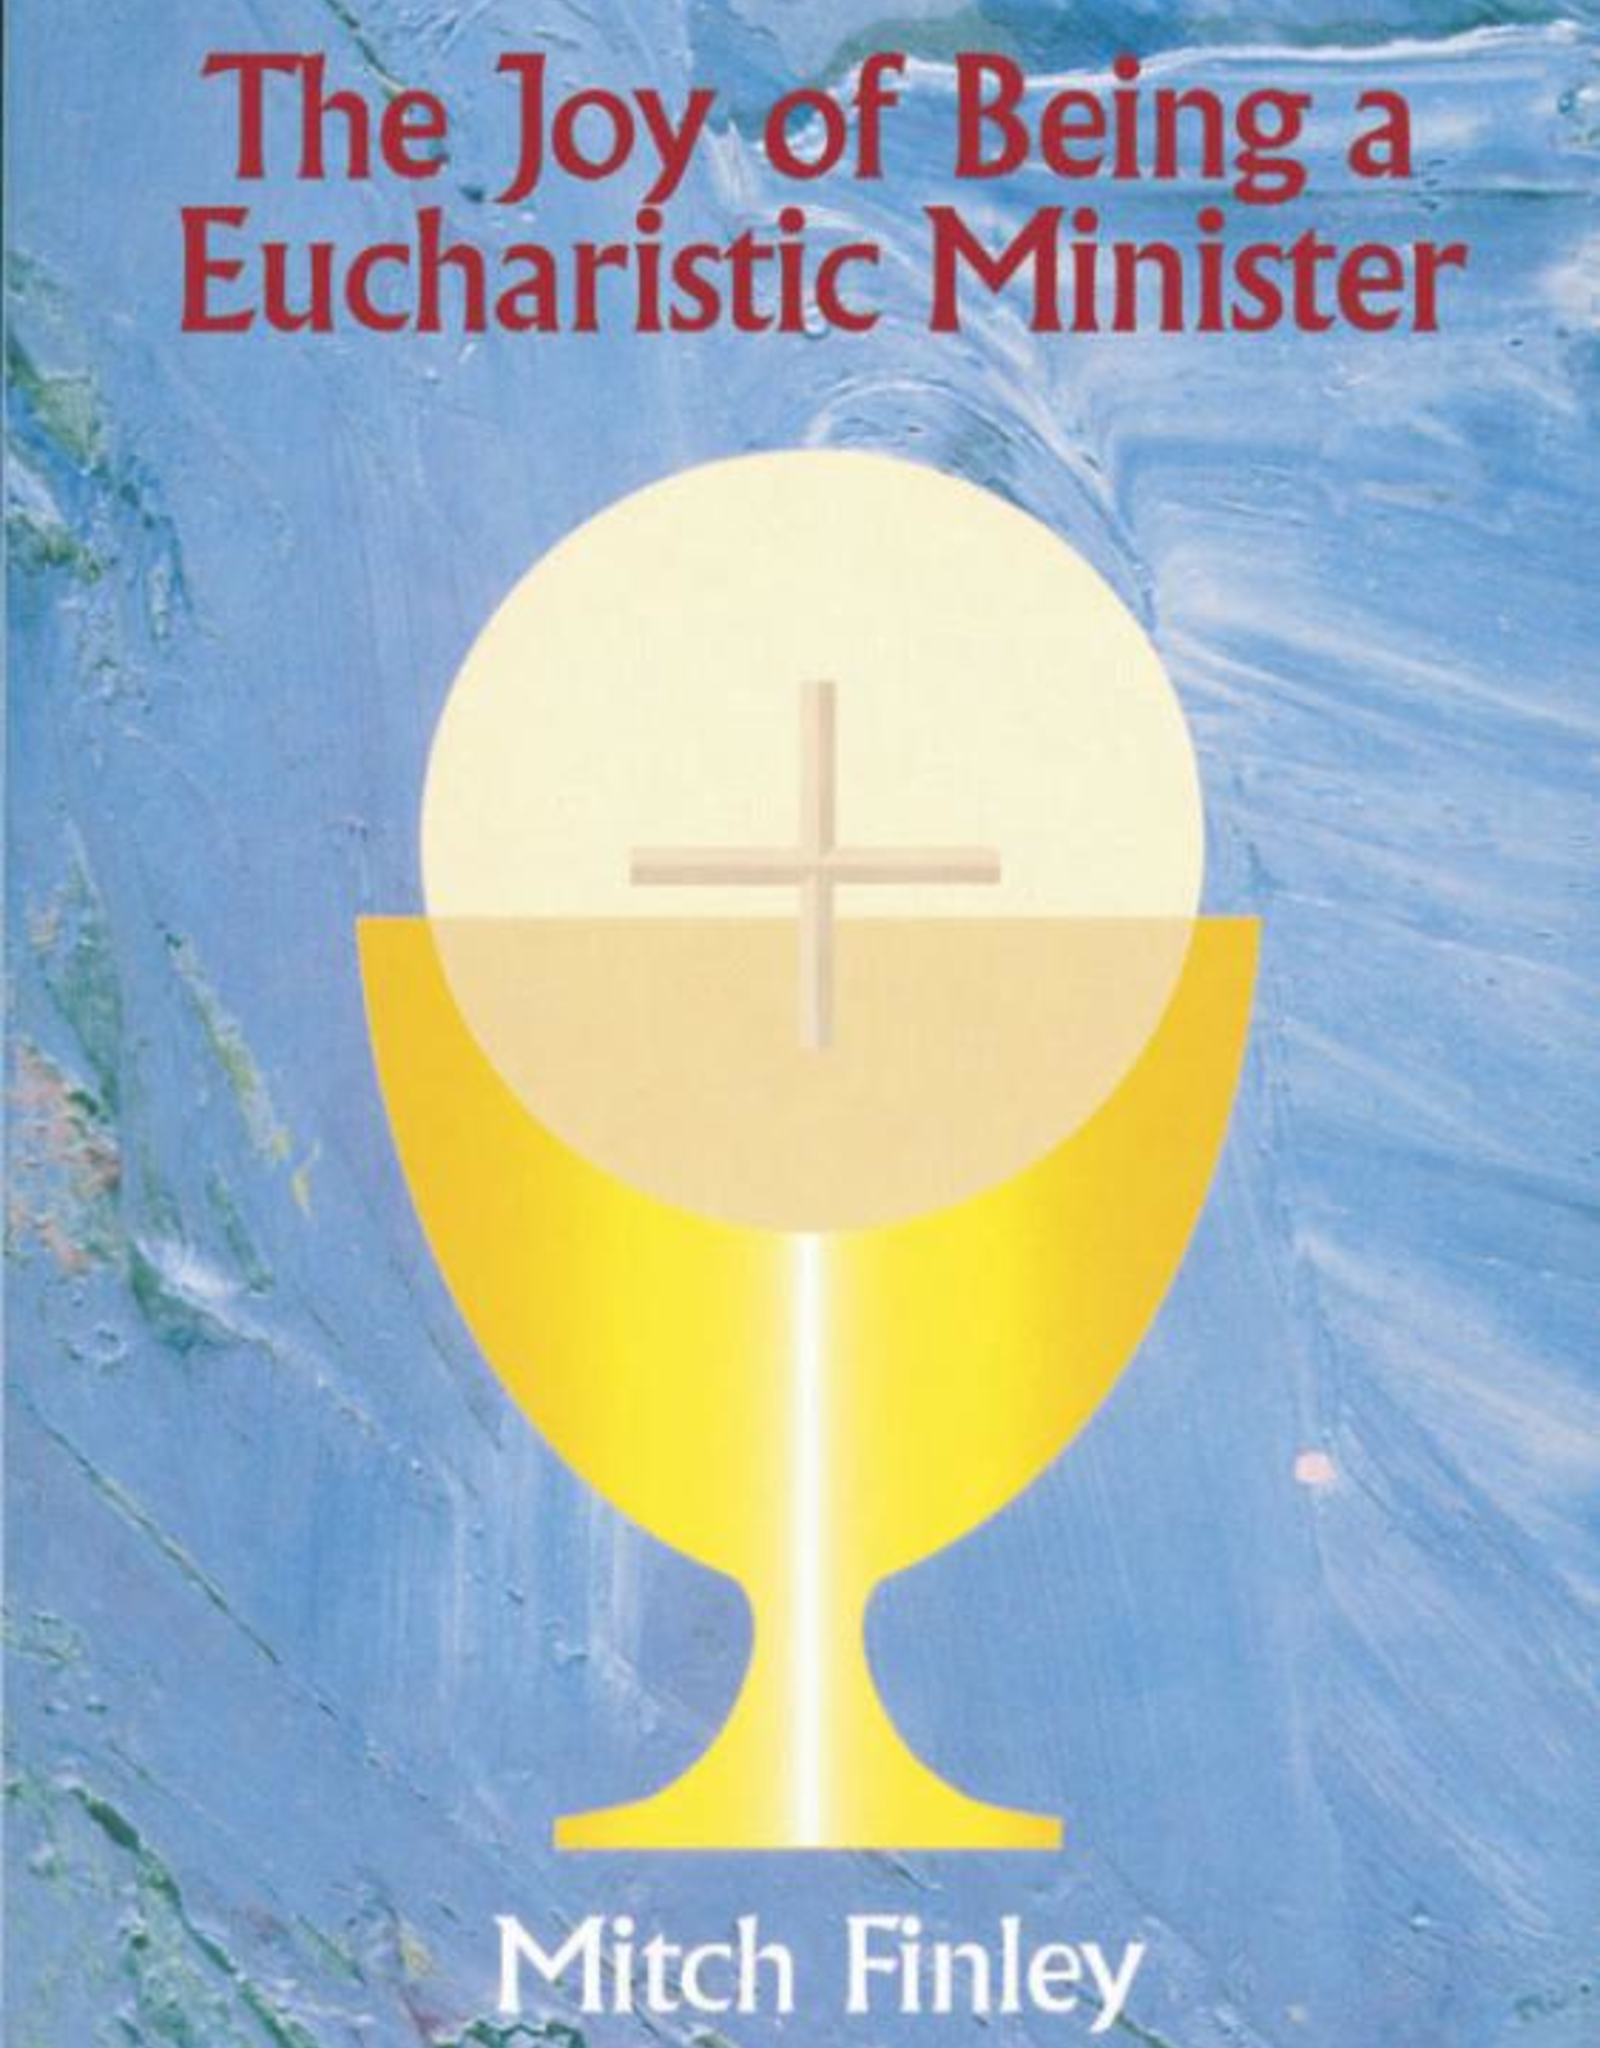 Catholic Book Publishing The Joy of Being a Eucharistic Minister, by Michael Finley